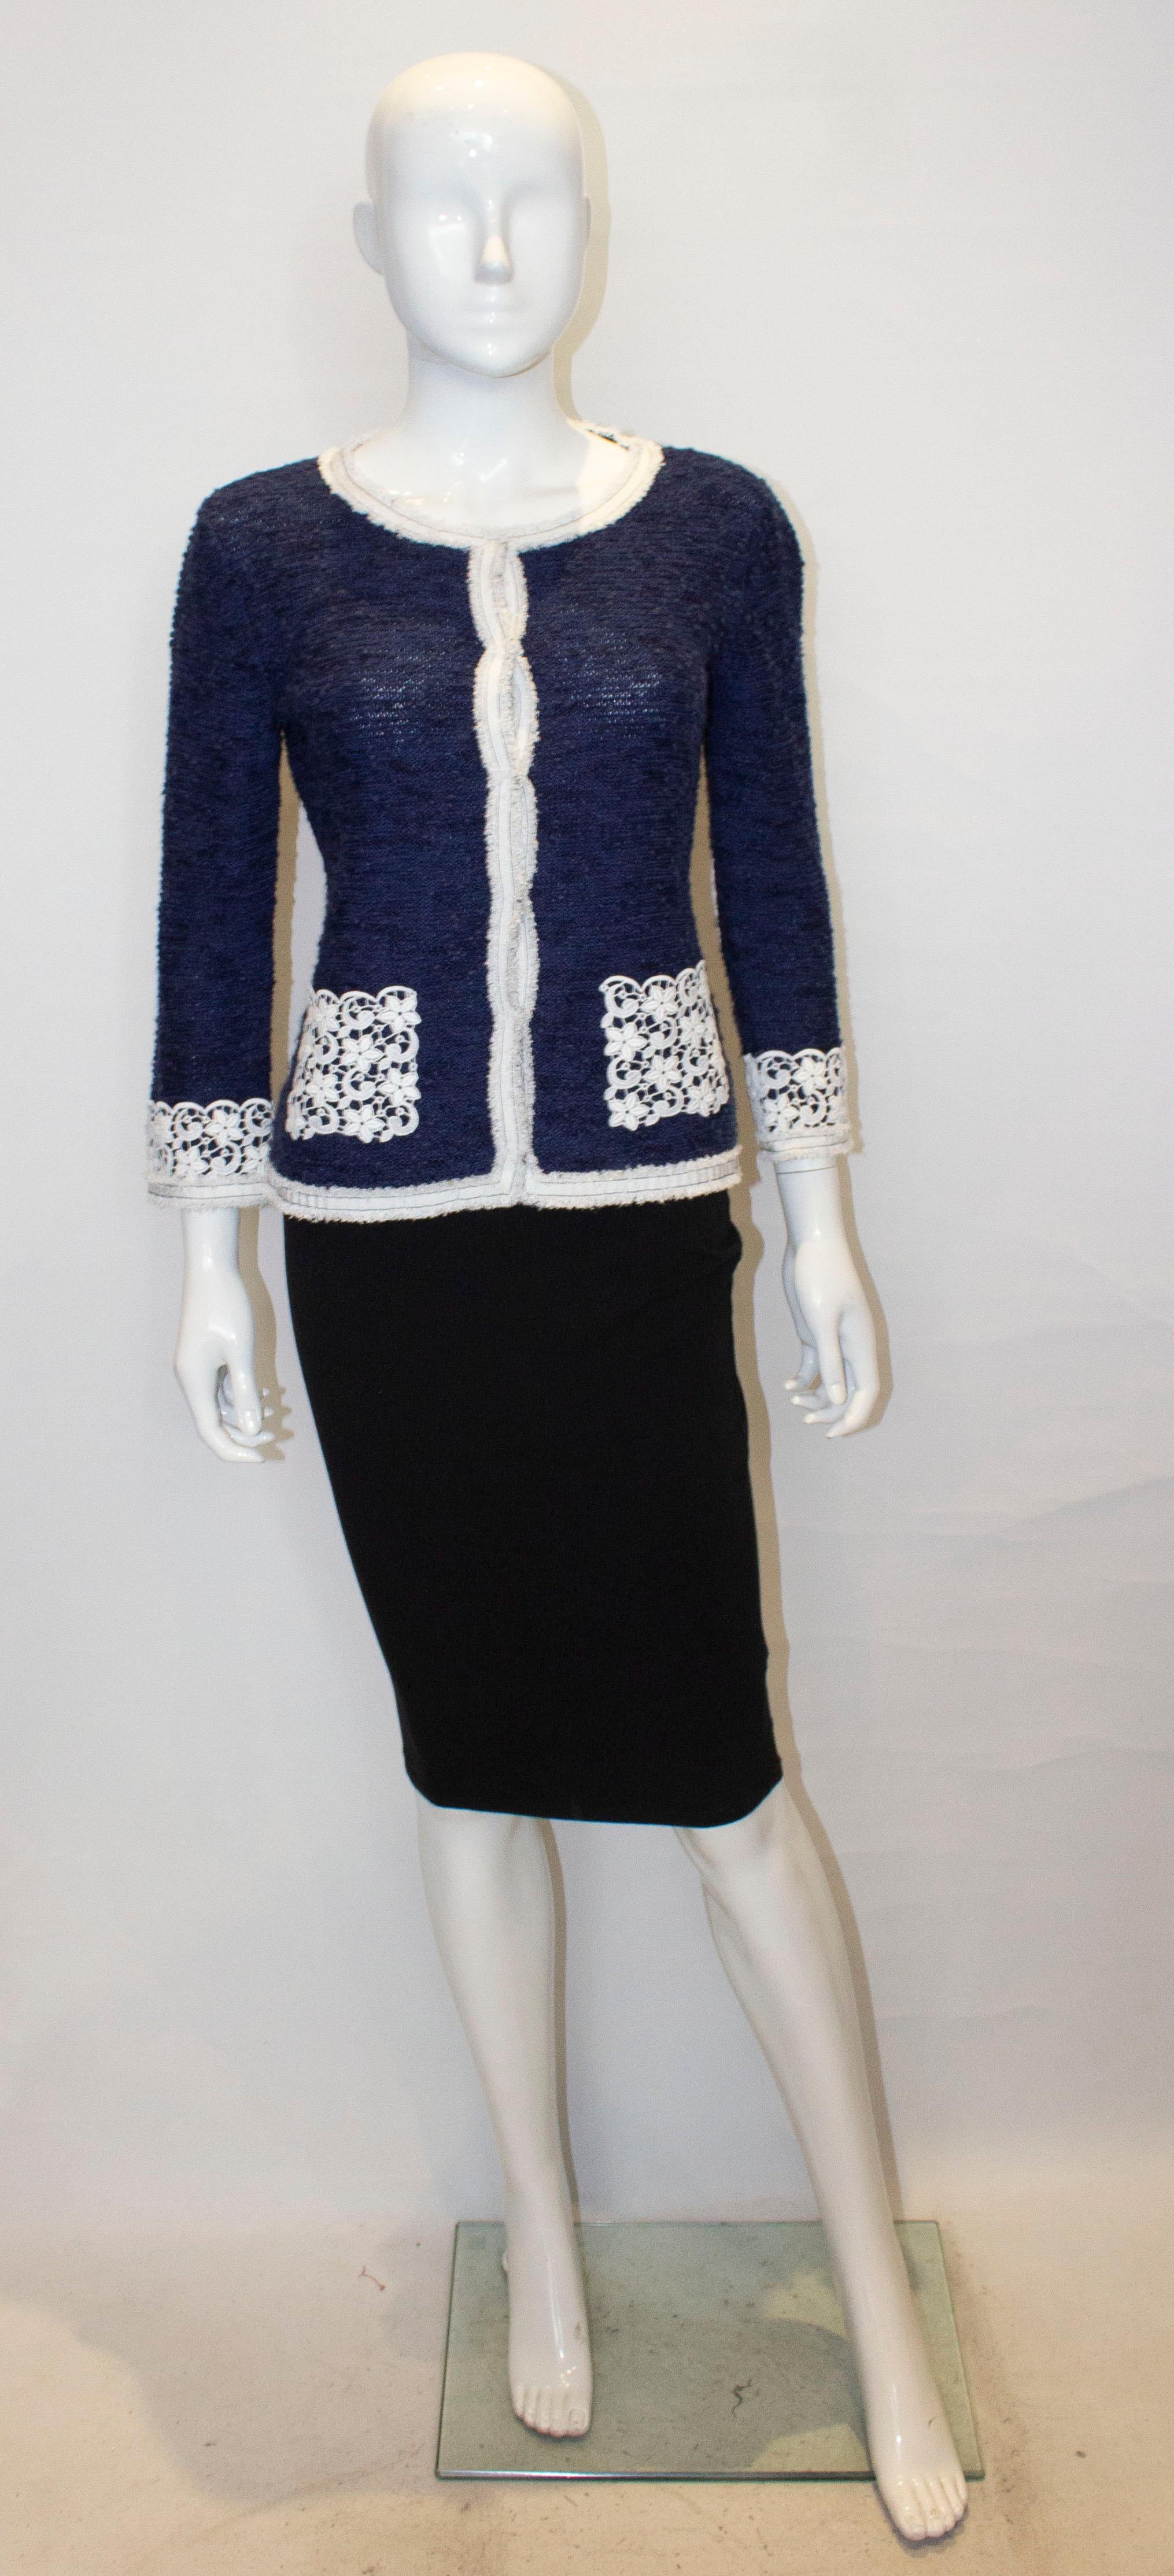 A grat jacket for Spring by Luisa Spagnoli. The jacket is in a blue knit fabric with a round collar , popper fastening, two lace pocket and lace detail on the cuffs.